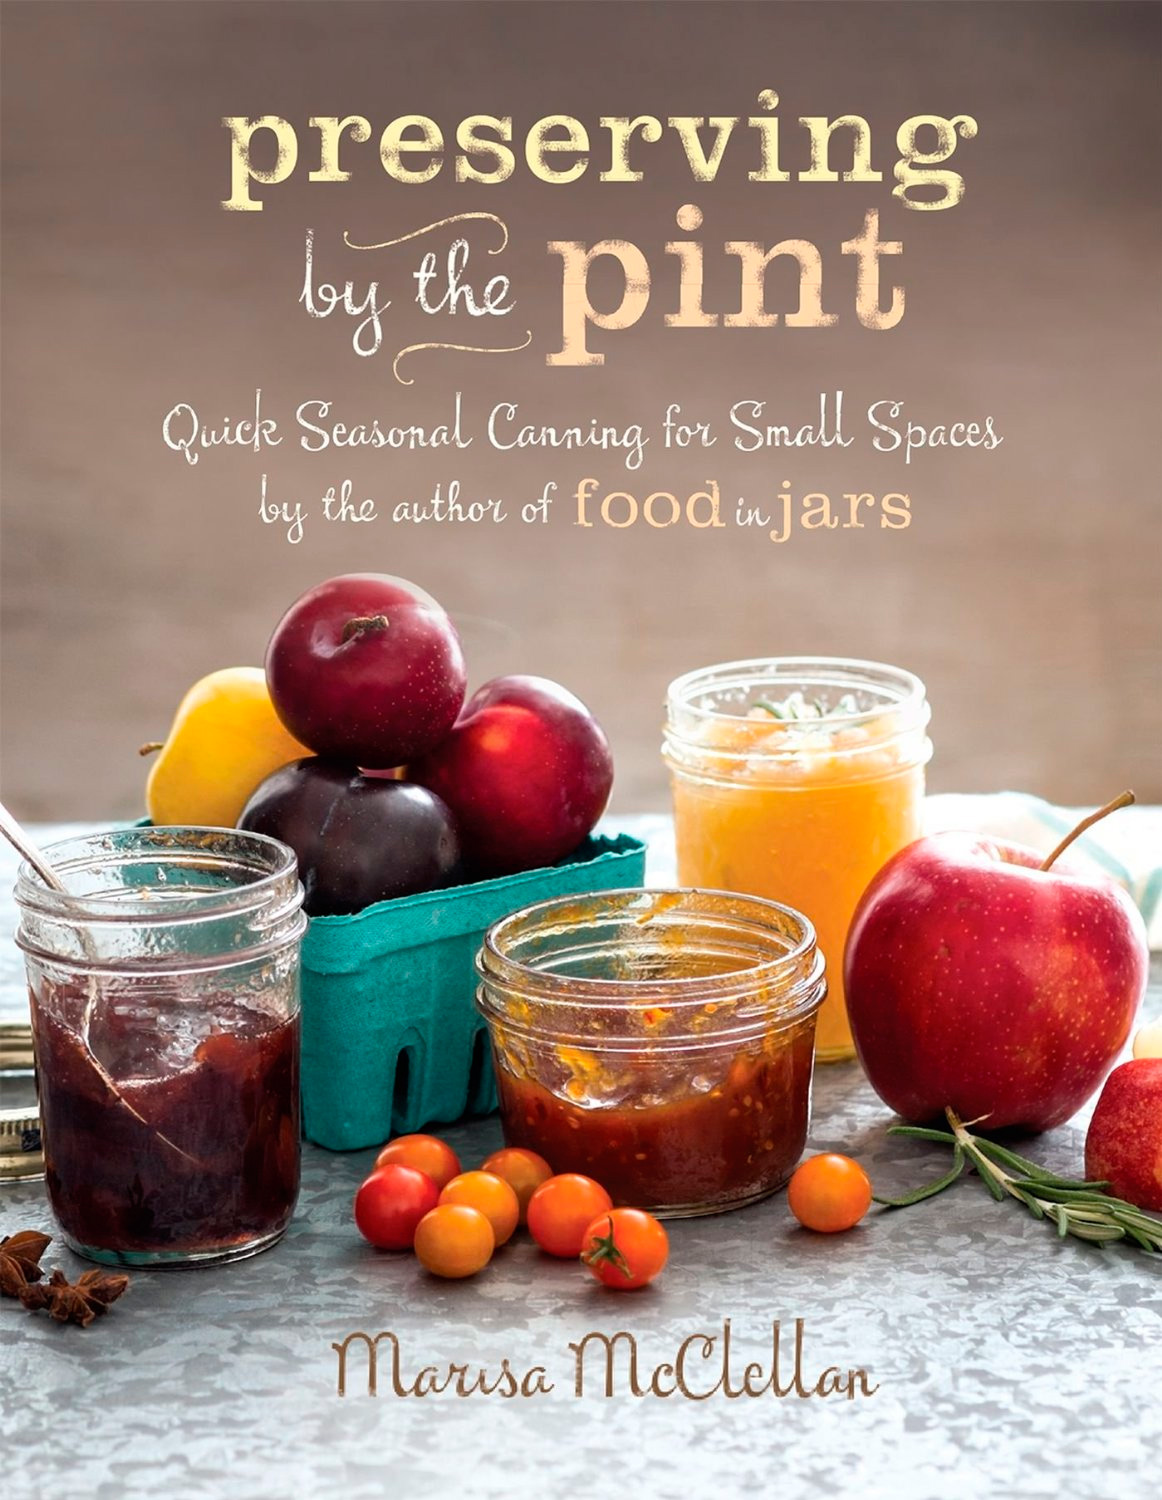 Preserving by the Pint: Quick Seasonal Canning for Small Spaces from the author of Food in Jars